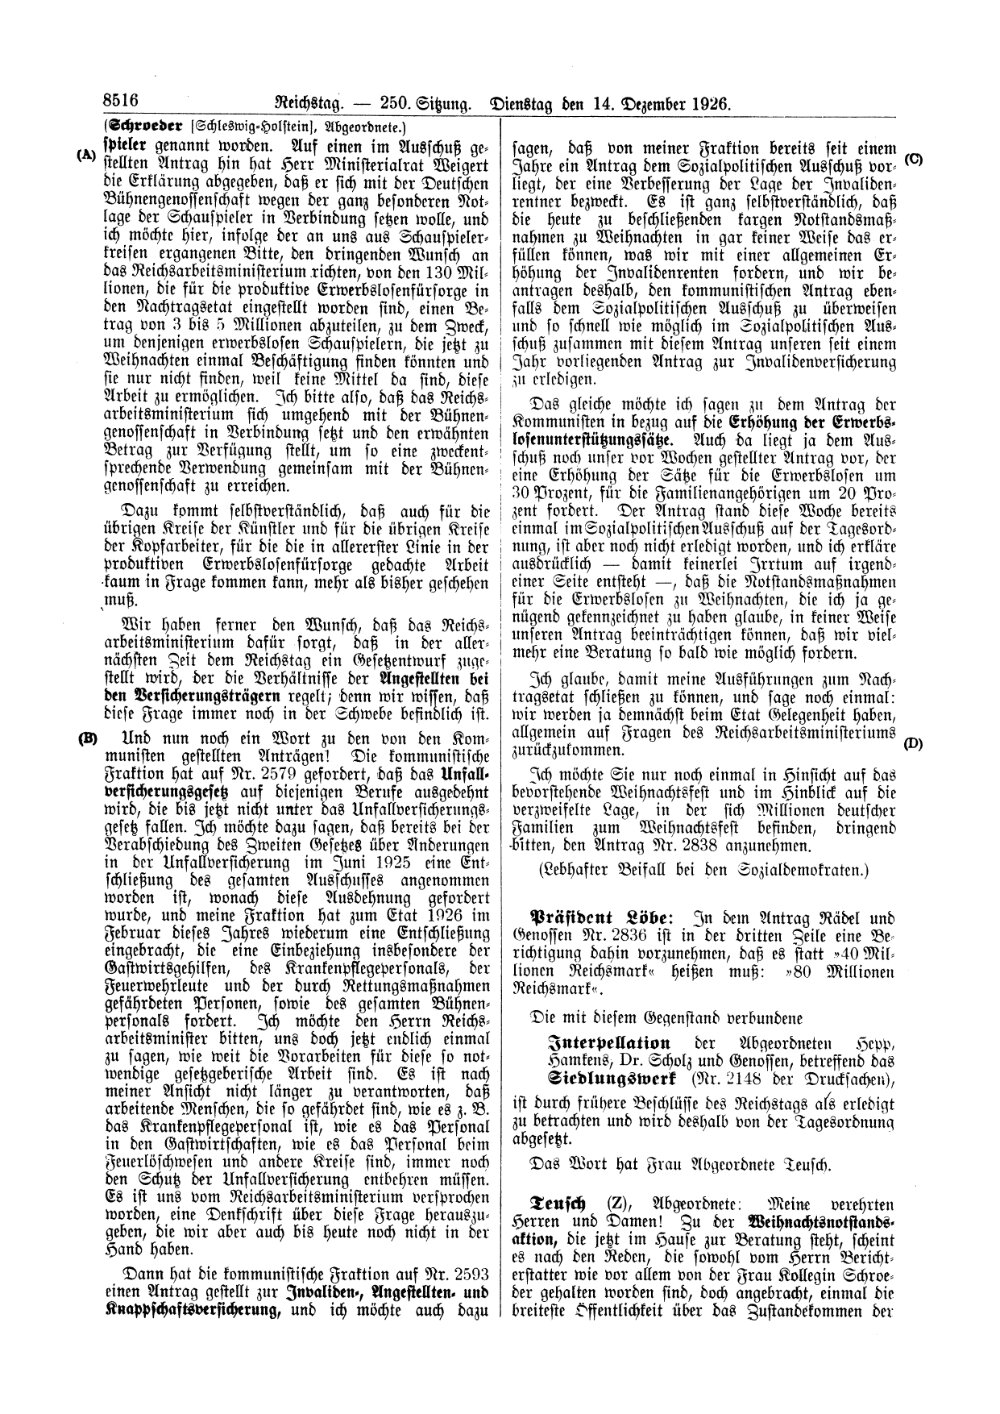 Scan of page 8516